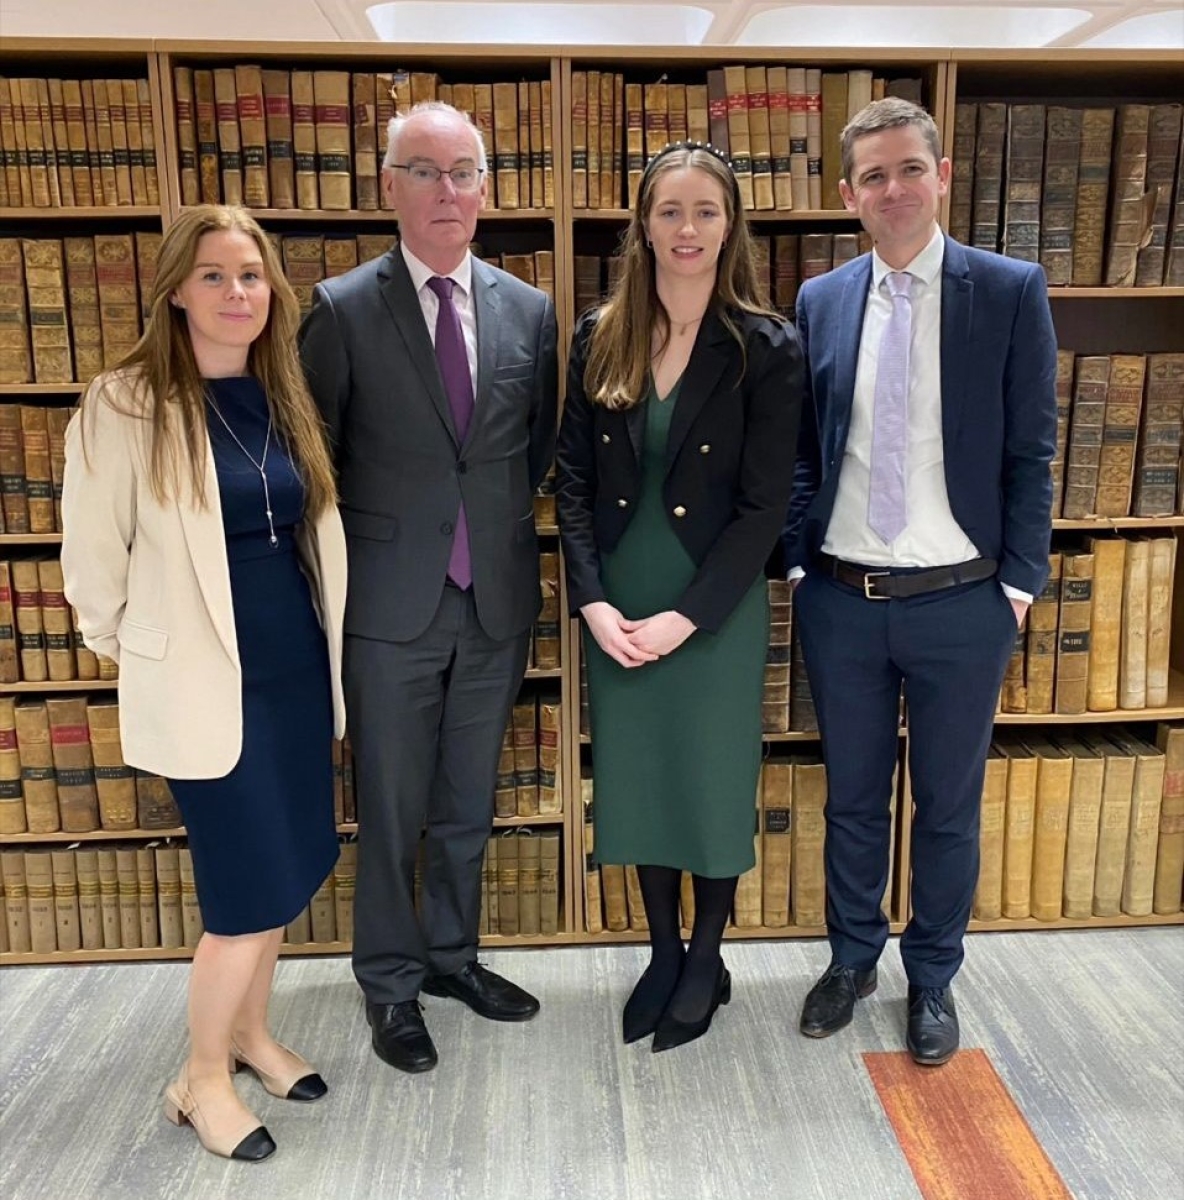 Dr Laura Cahillane, Prof Paul McCutcheon, Dr Saoirse Enright, and Dr Tom Hickey of DCU in the School of Law after Dr Enrights thesis defense